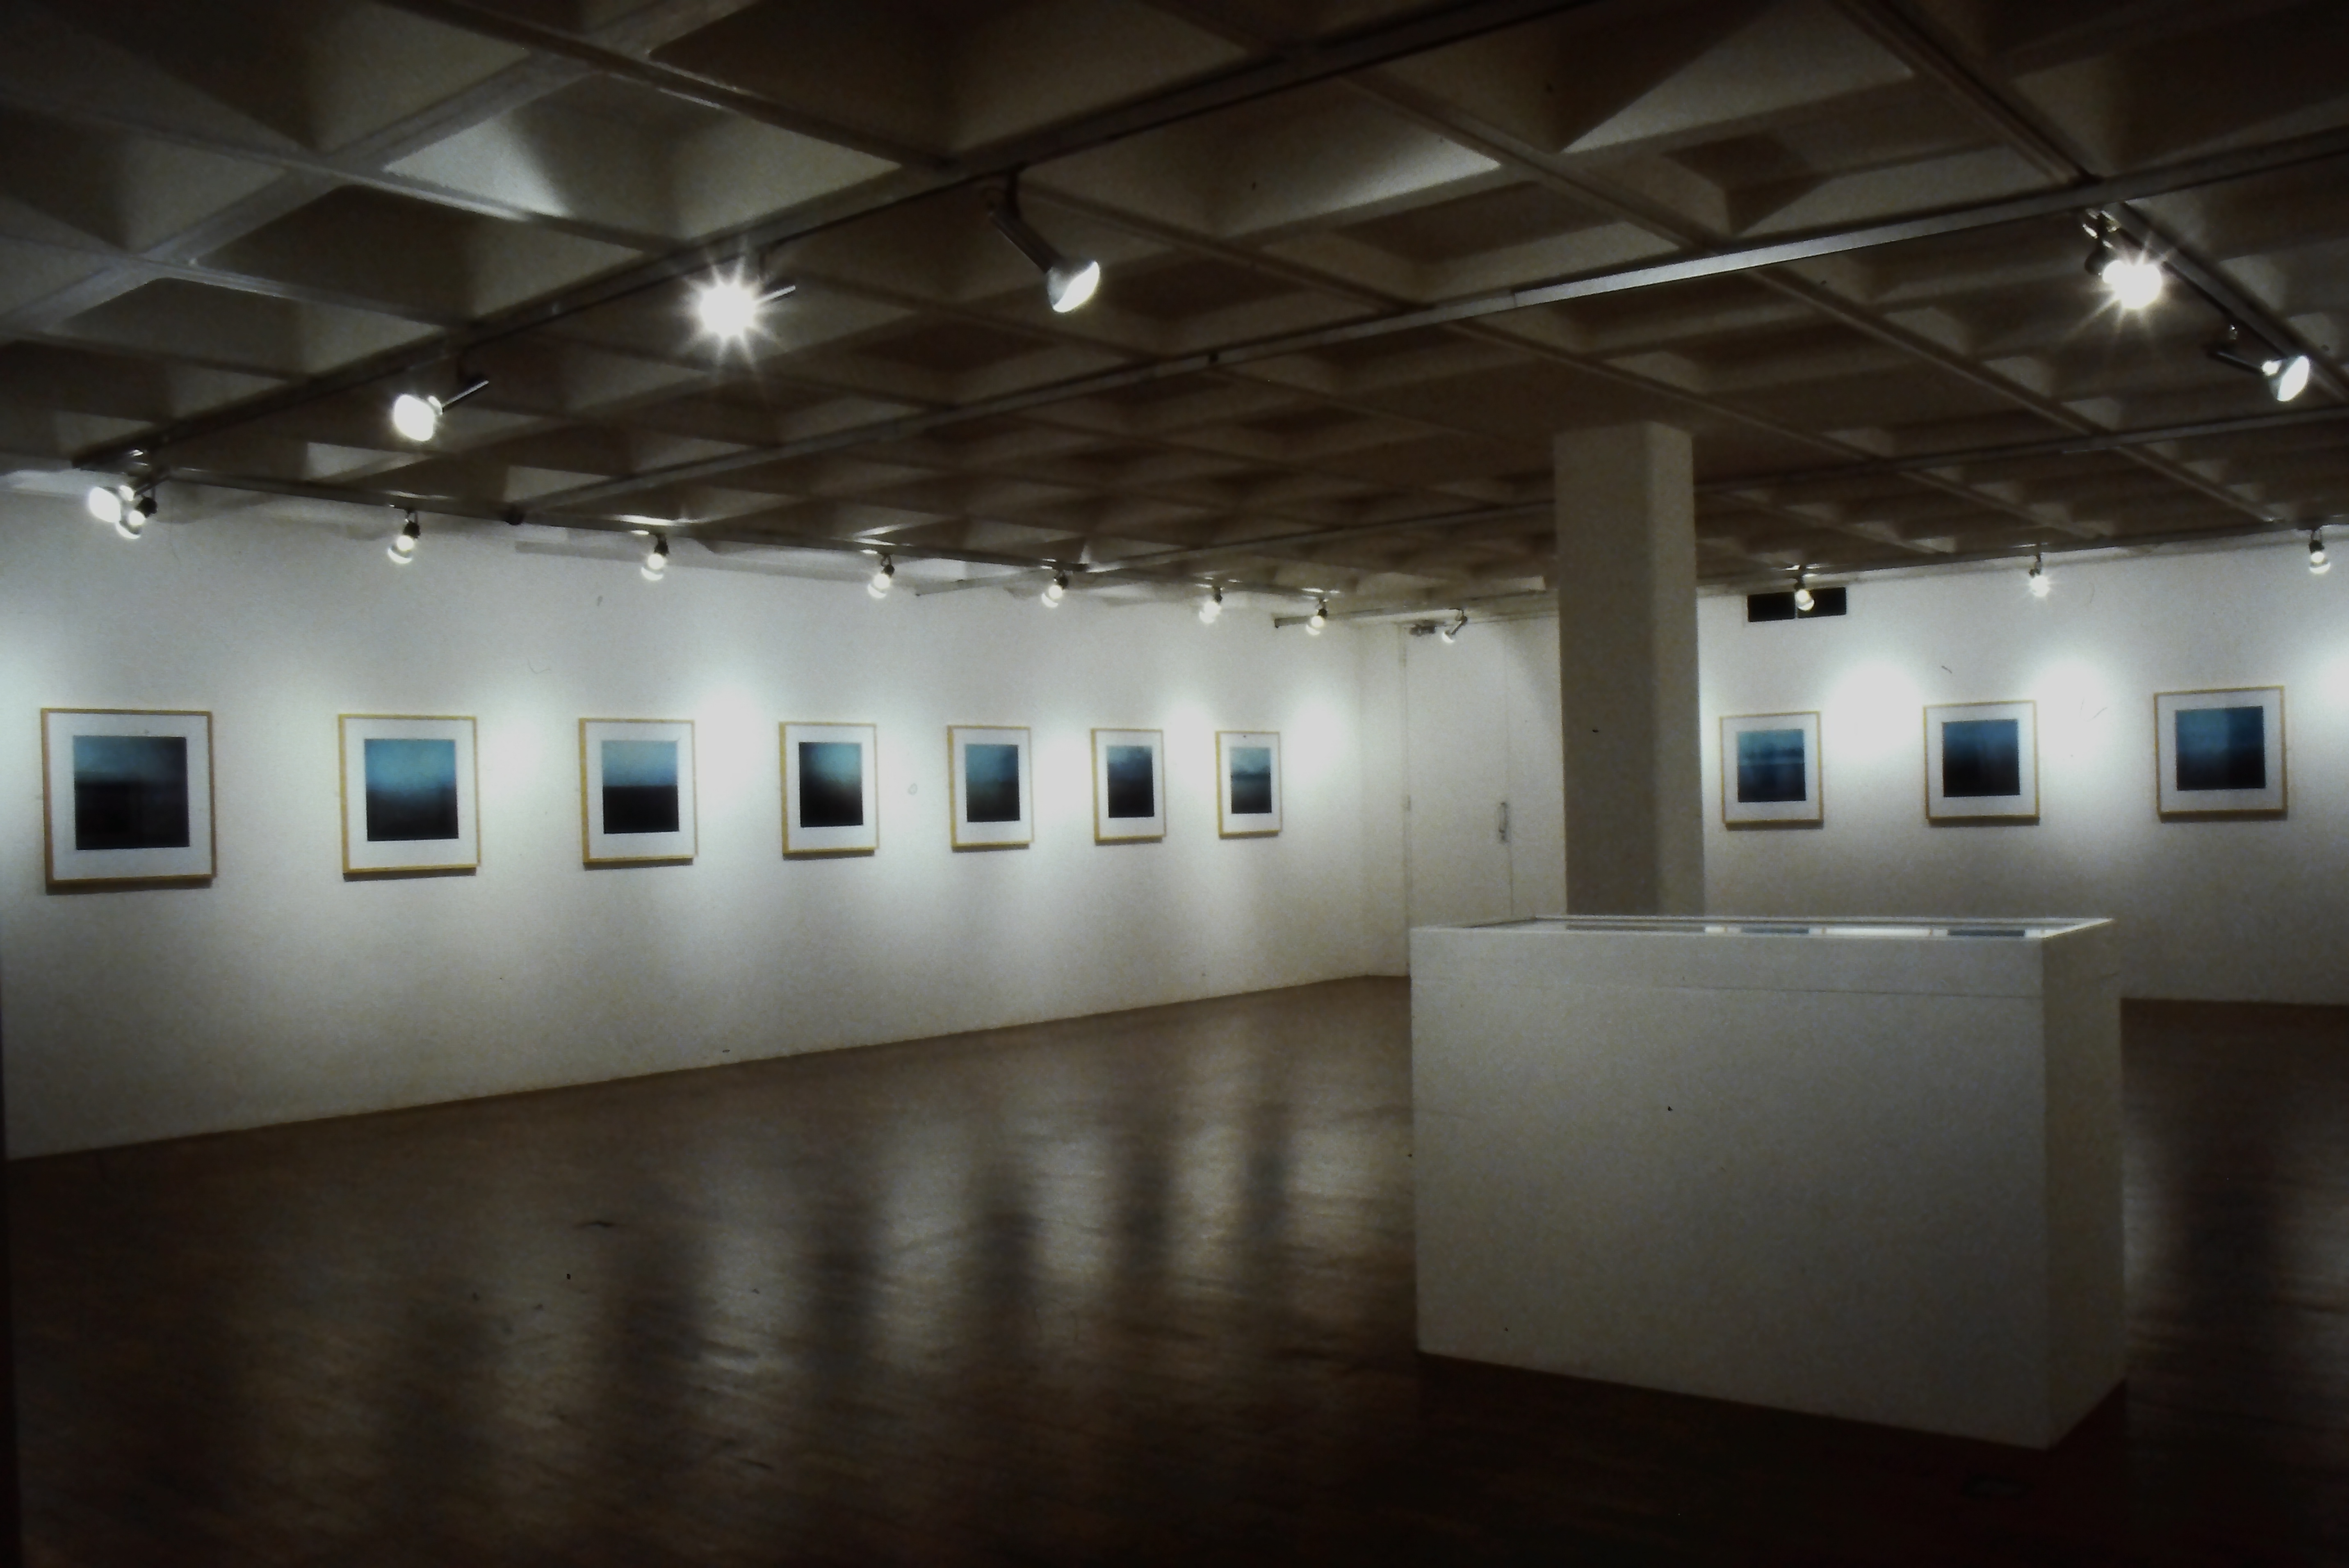 Photographic slide from Arnolfini's 1997 exhibition of Garry Fabian Miller's series Sections of England: The Sea Horizon 1976/77.